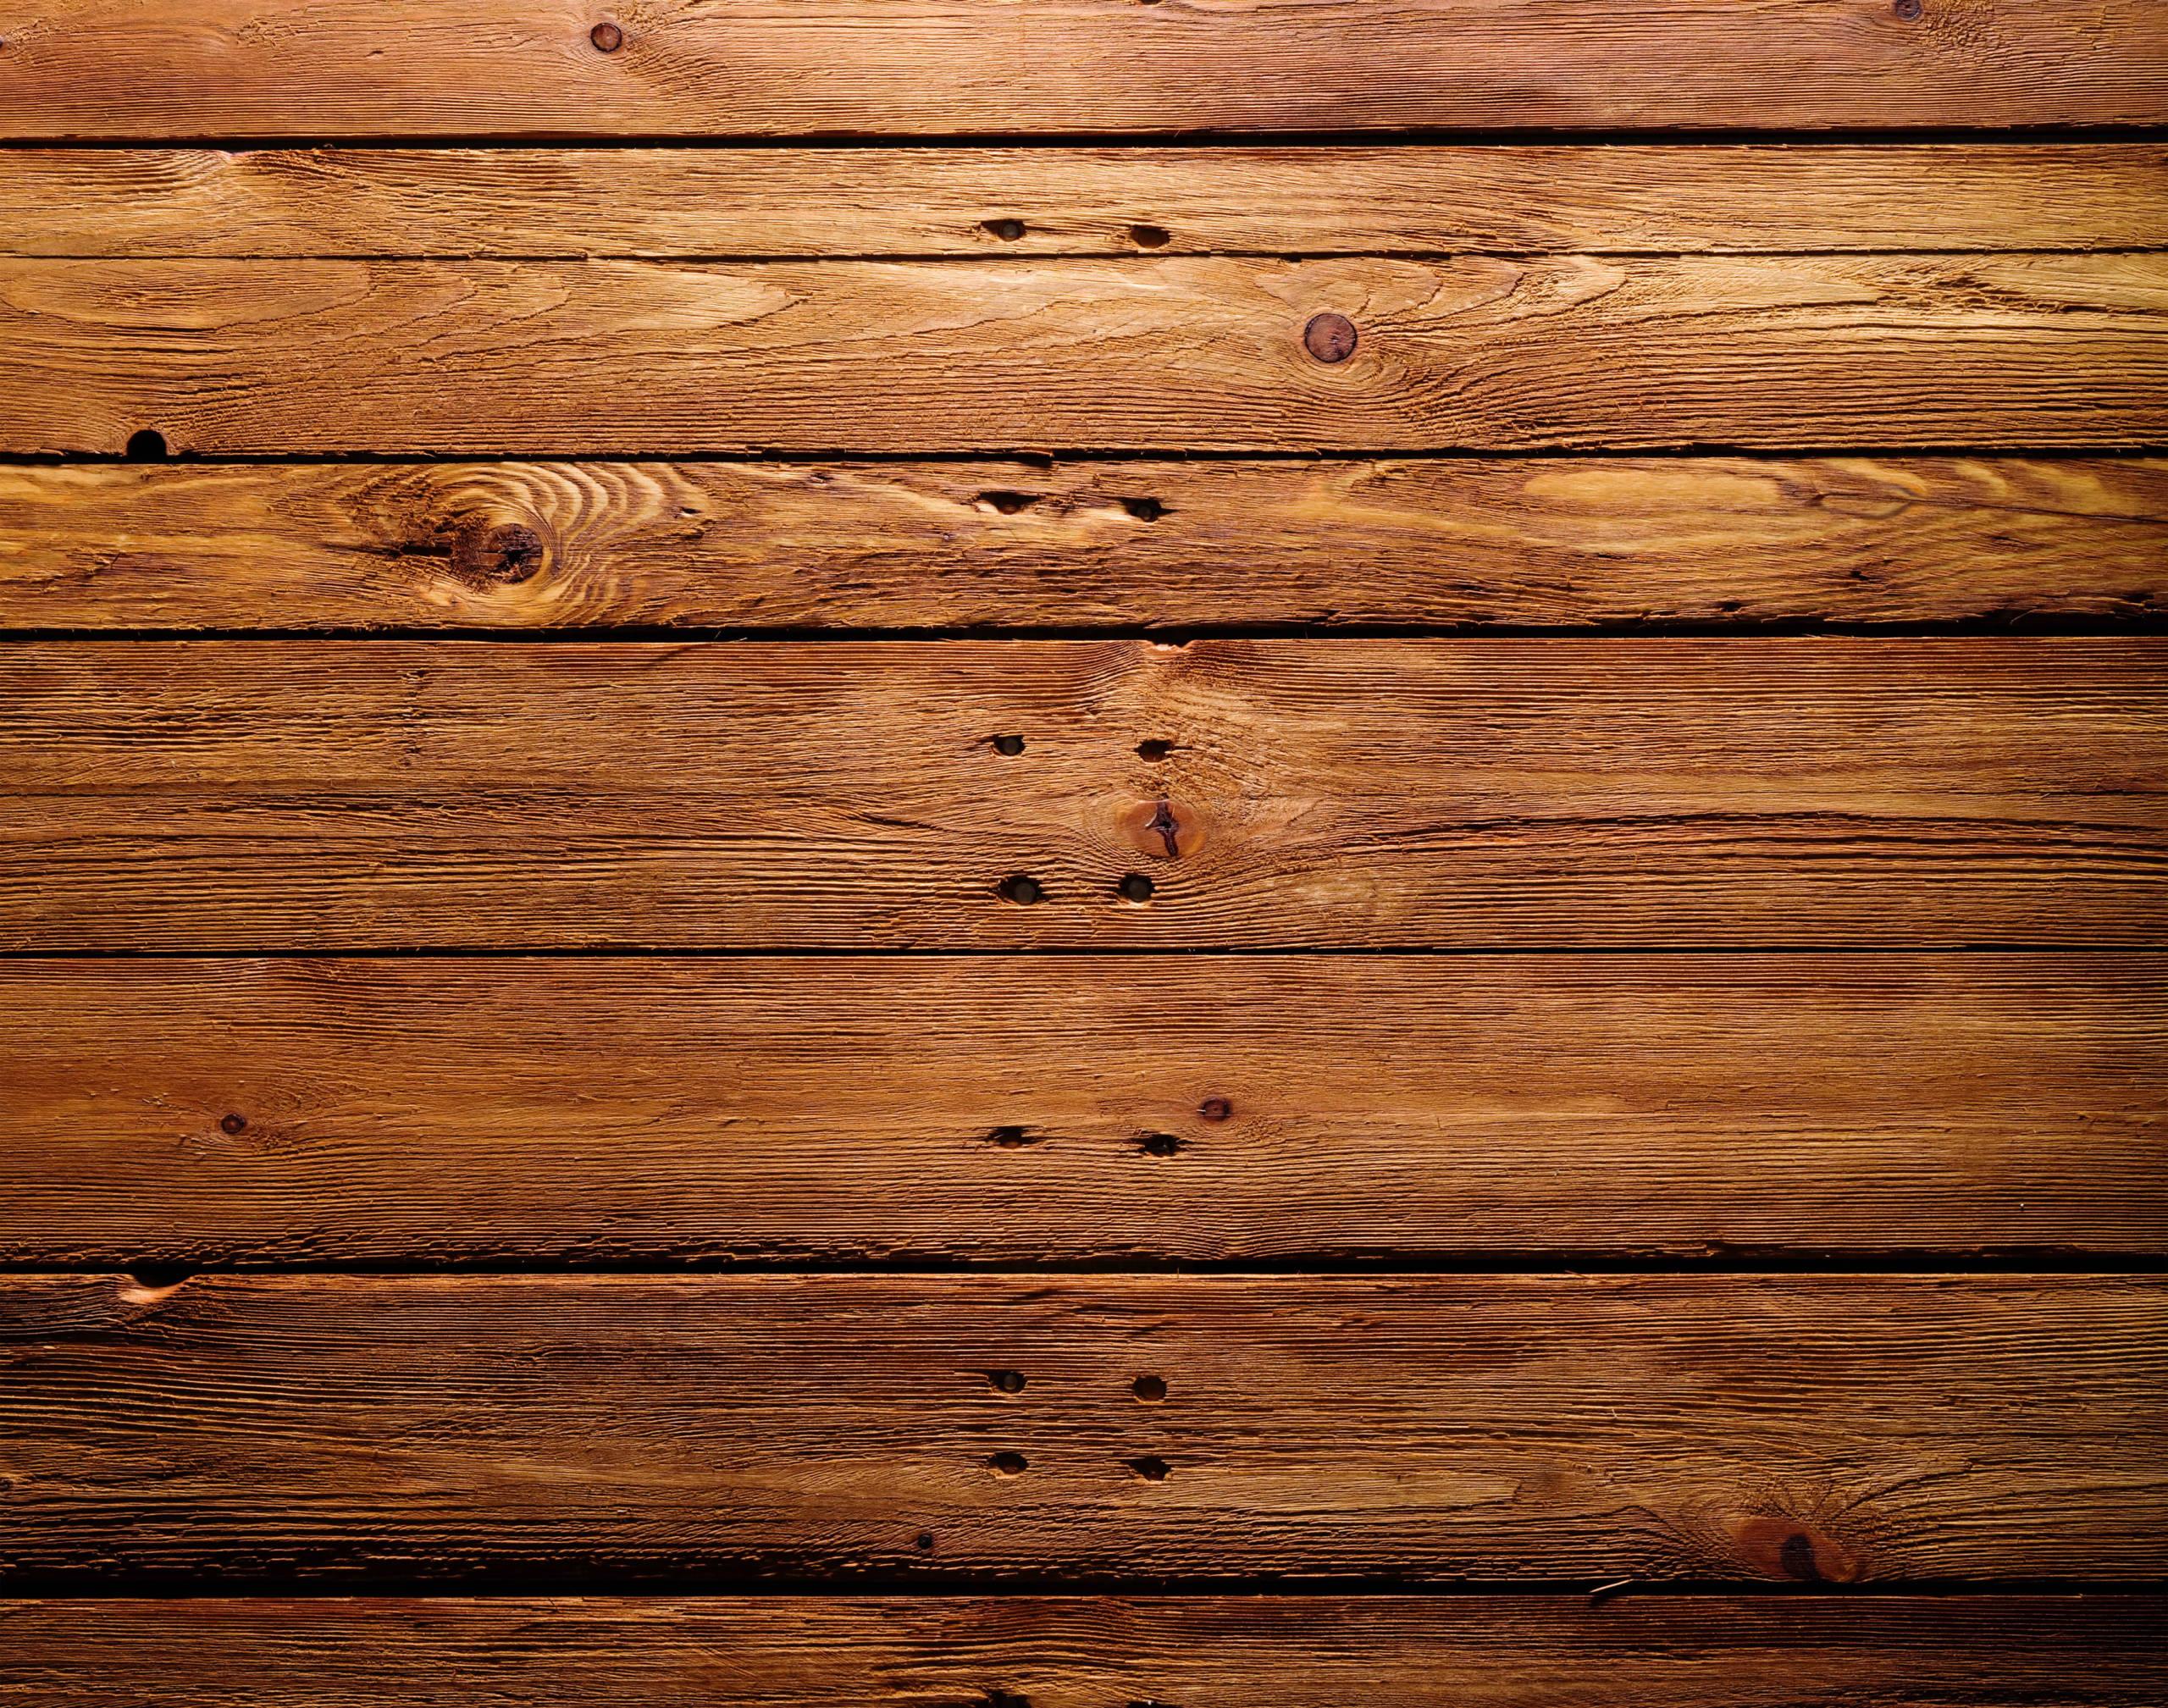 2560 x 2017 · jpeg - Wood background textures that you can add in your designs